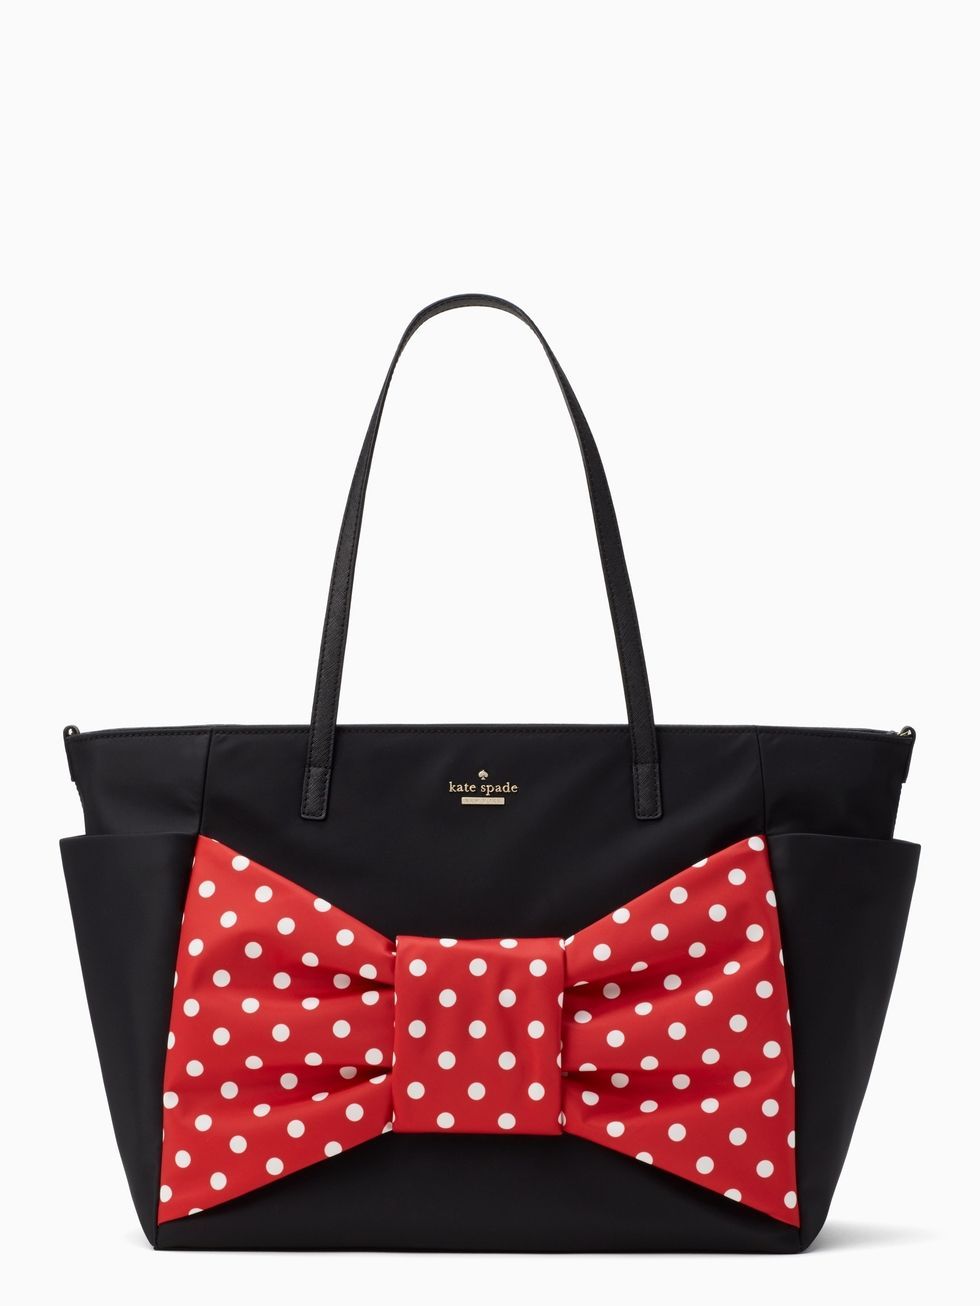 Skip The Crowds and Get Kate Spade's NEW Disney Collection HERE Instead! -  AllEars.Net